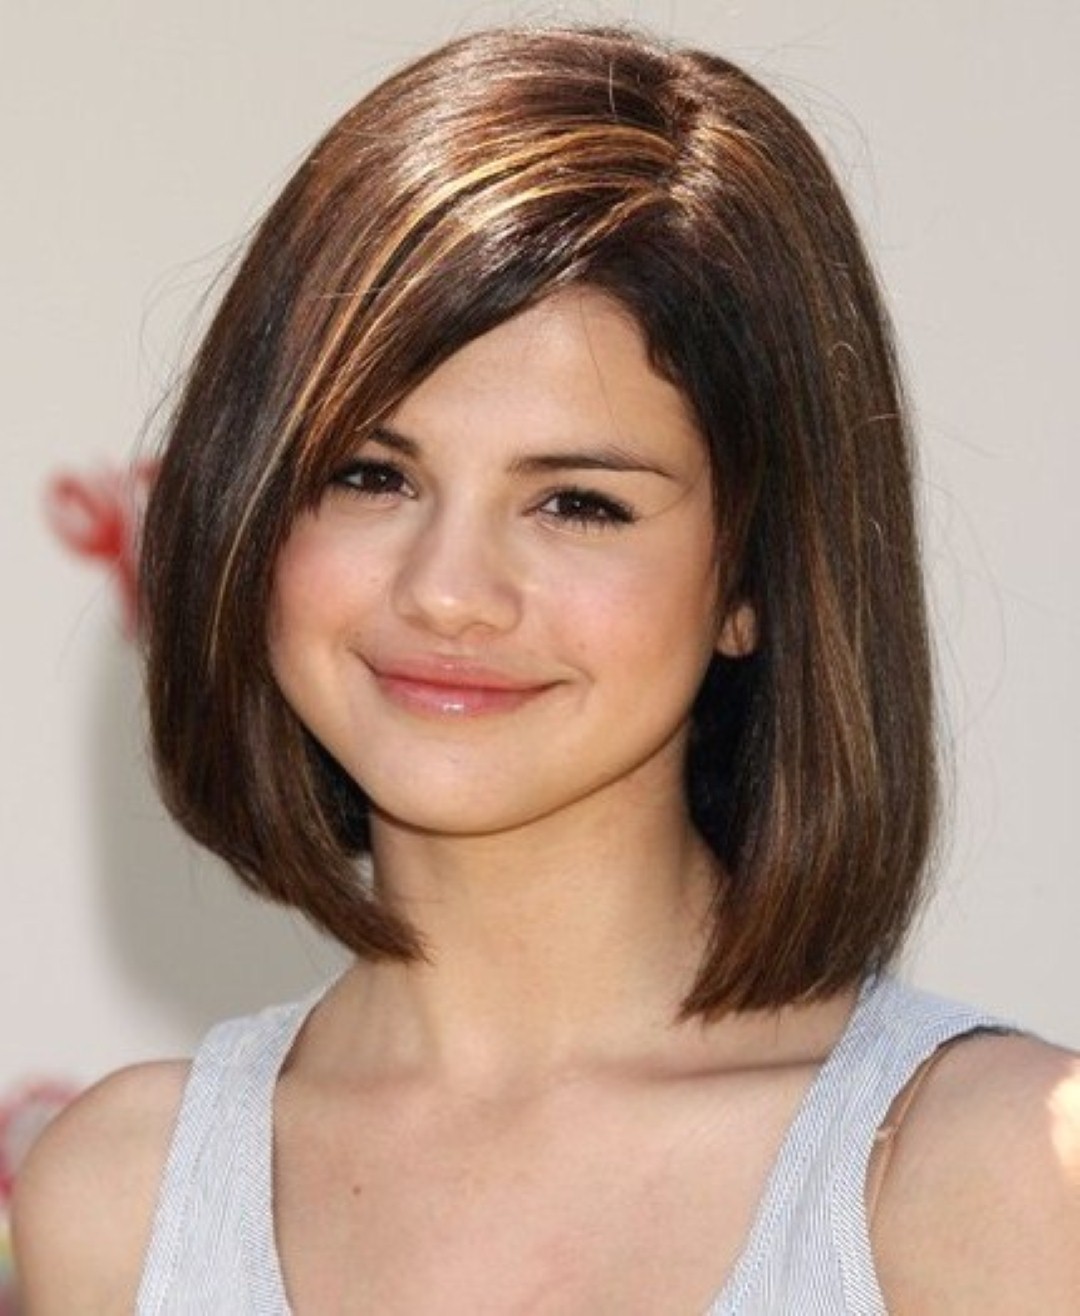 Best Short Hairstyles for Girls Images